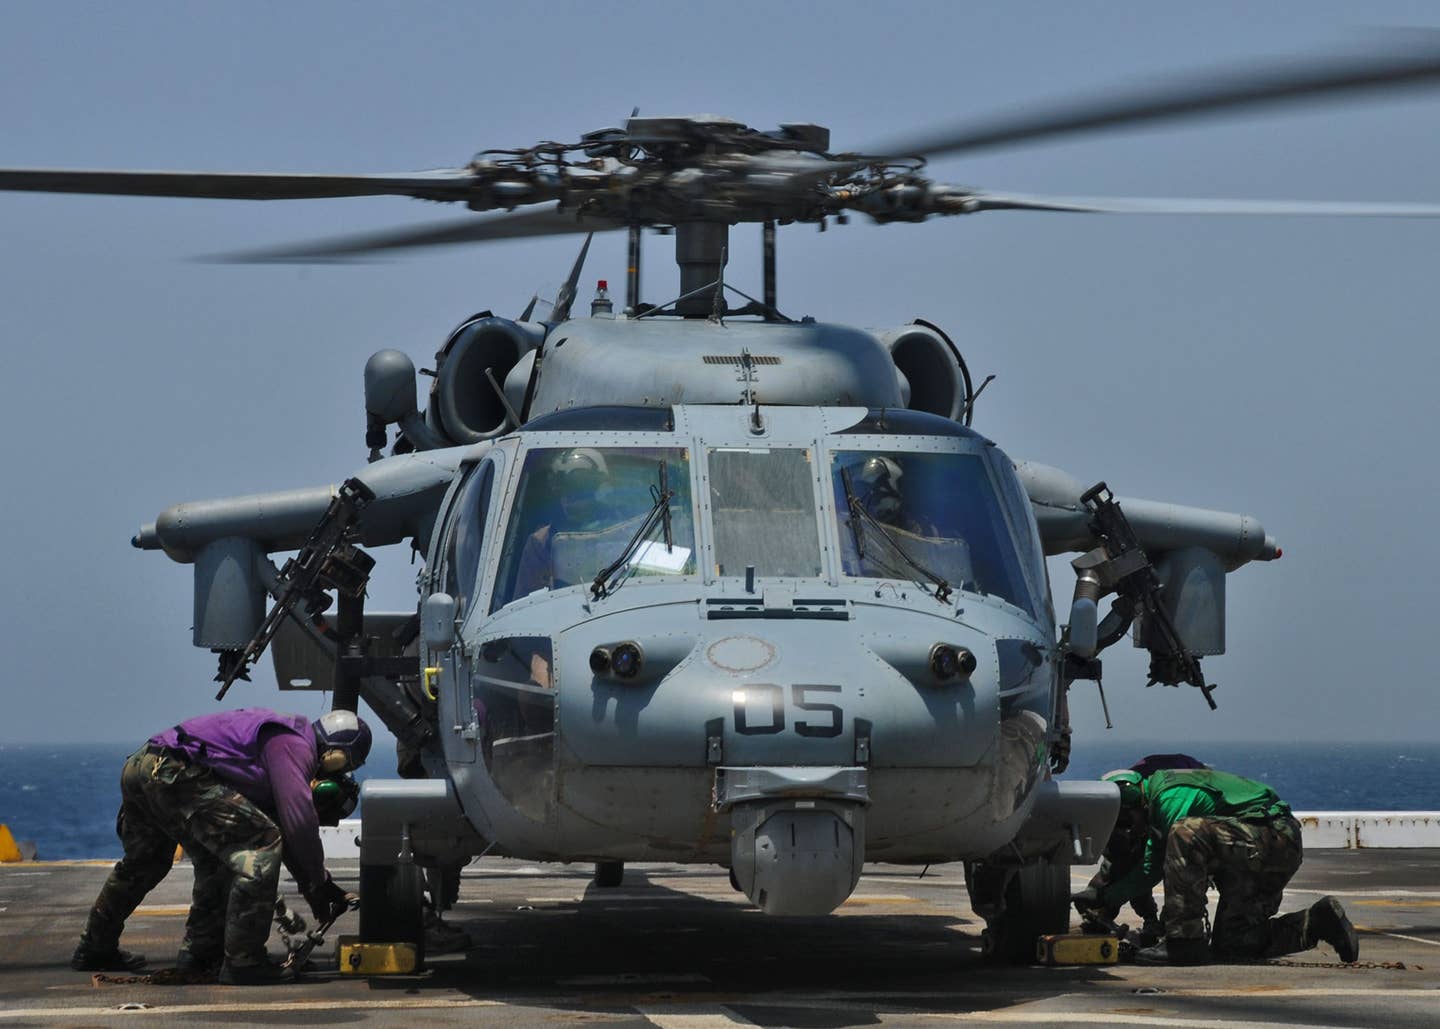 Sailors aboard the amphibious transport dock ship USS <em>New York</em> tie down an MH-60S Sea Hawk helicopter from Helicopter Sea Combat Squadron (HSC) 22 to the ship's flight deck. <em>Credit: Mass Communication Specialist 2nd Class Zane Ecklund/U.S. Navy</em>